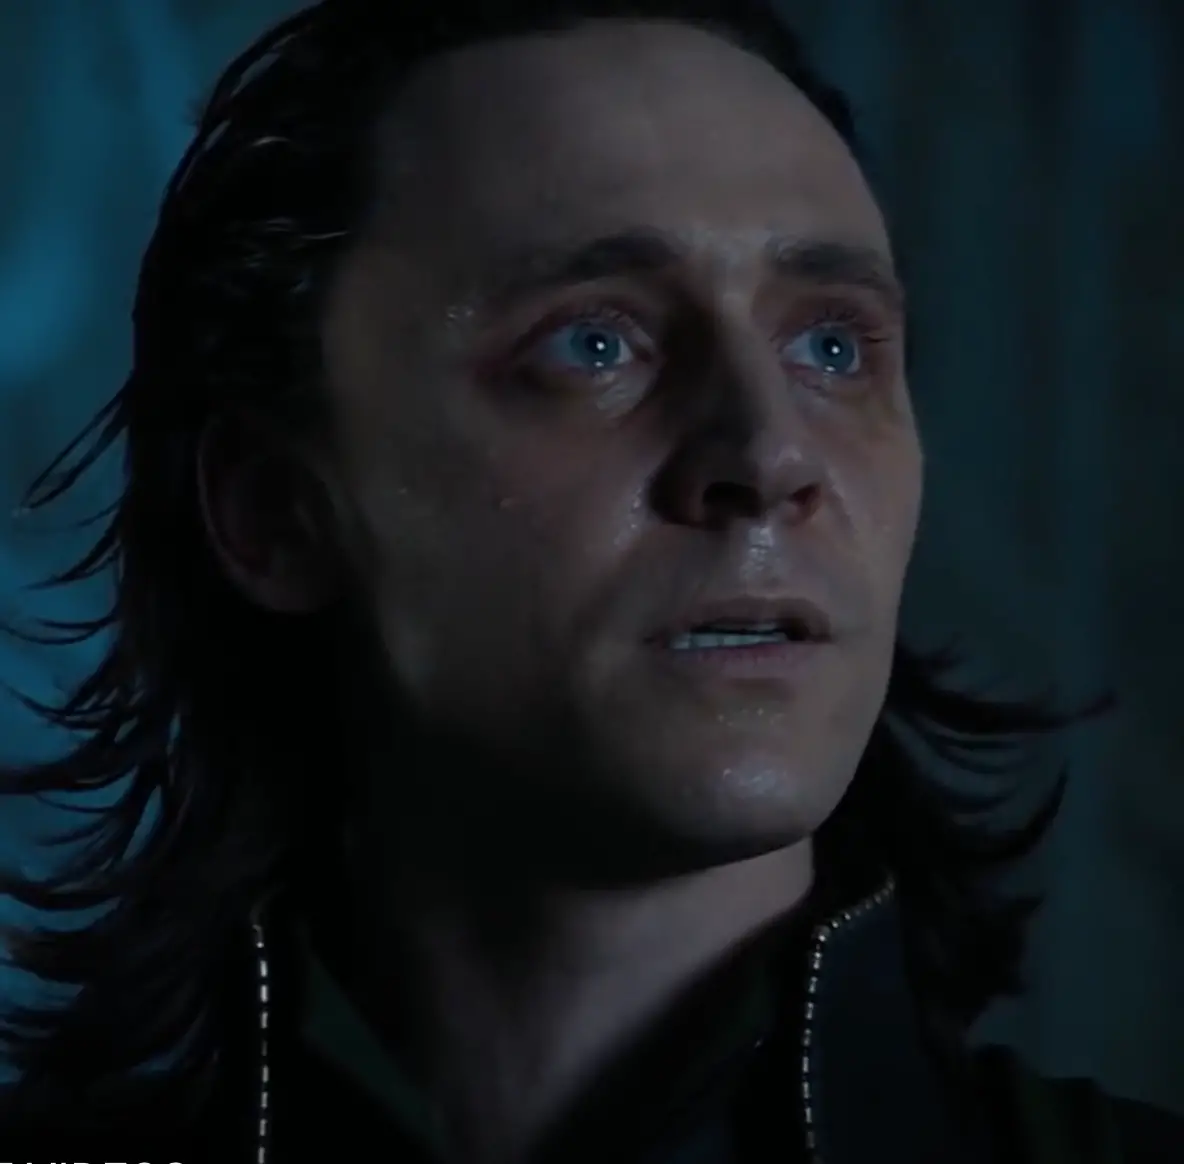 Tom Hiddleston as Loki in The Avengers at the moment the character is introduced